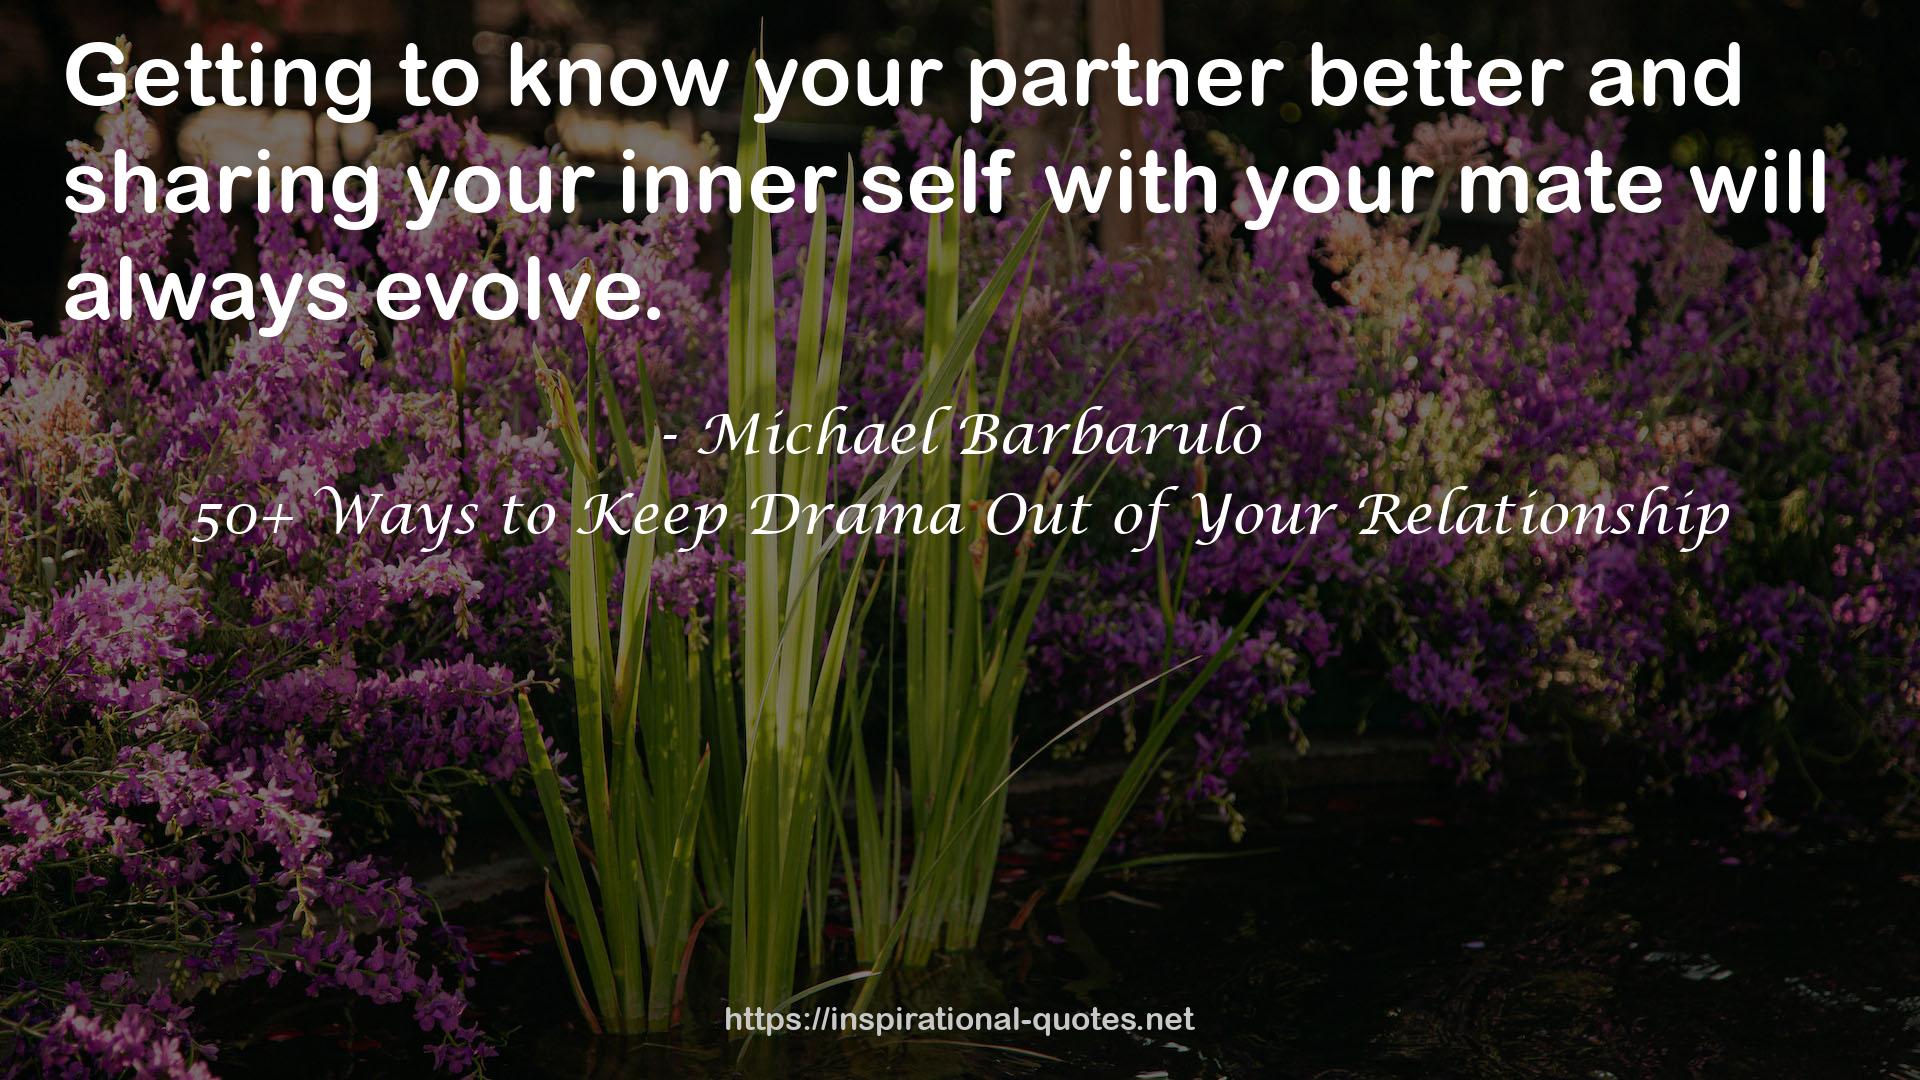 50+ Ways to Keep Drama Out of Your Relationship QUOTES